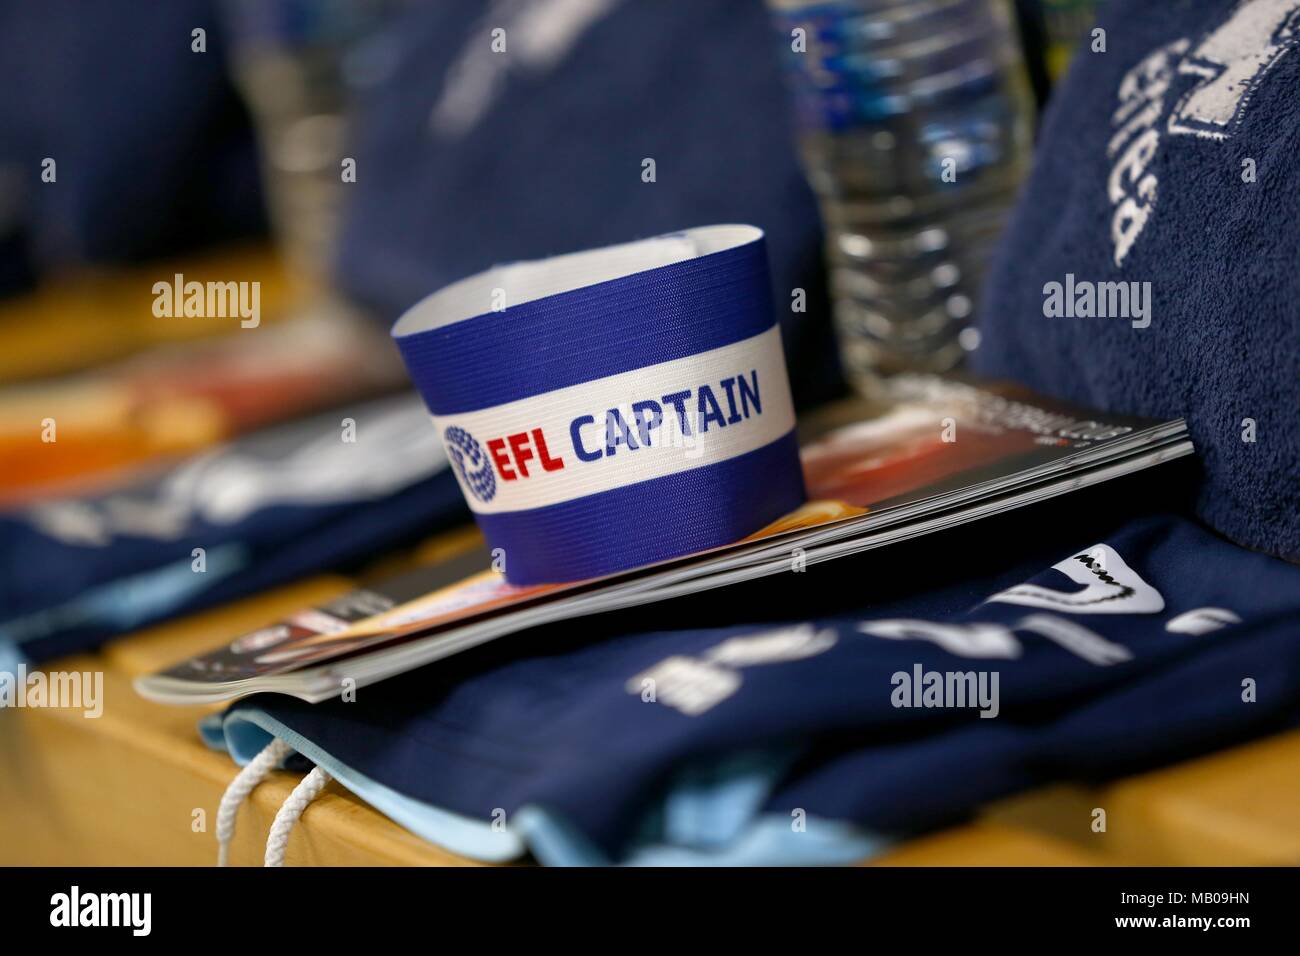 Captains arm band during the Sky Bet League 2 match between Barnet and Crawley Town at Underhill Stadium in London. 23 Sep 2017 Stock Photo